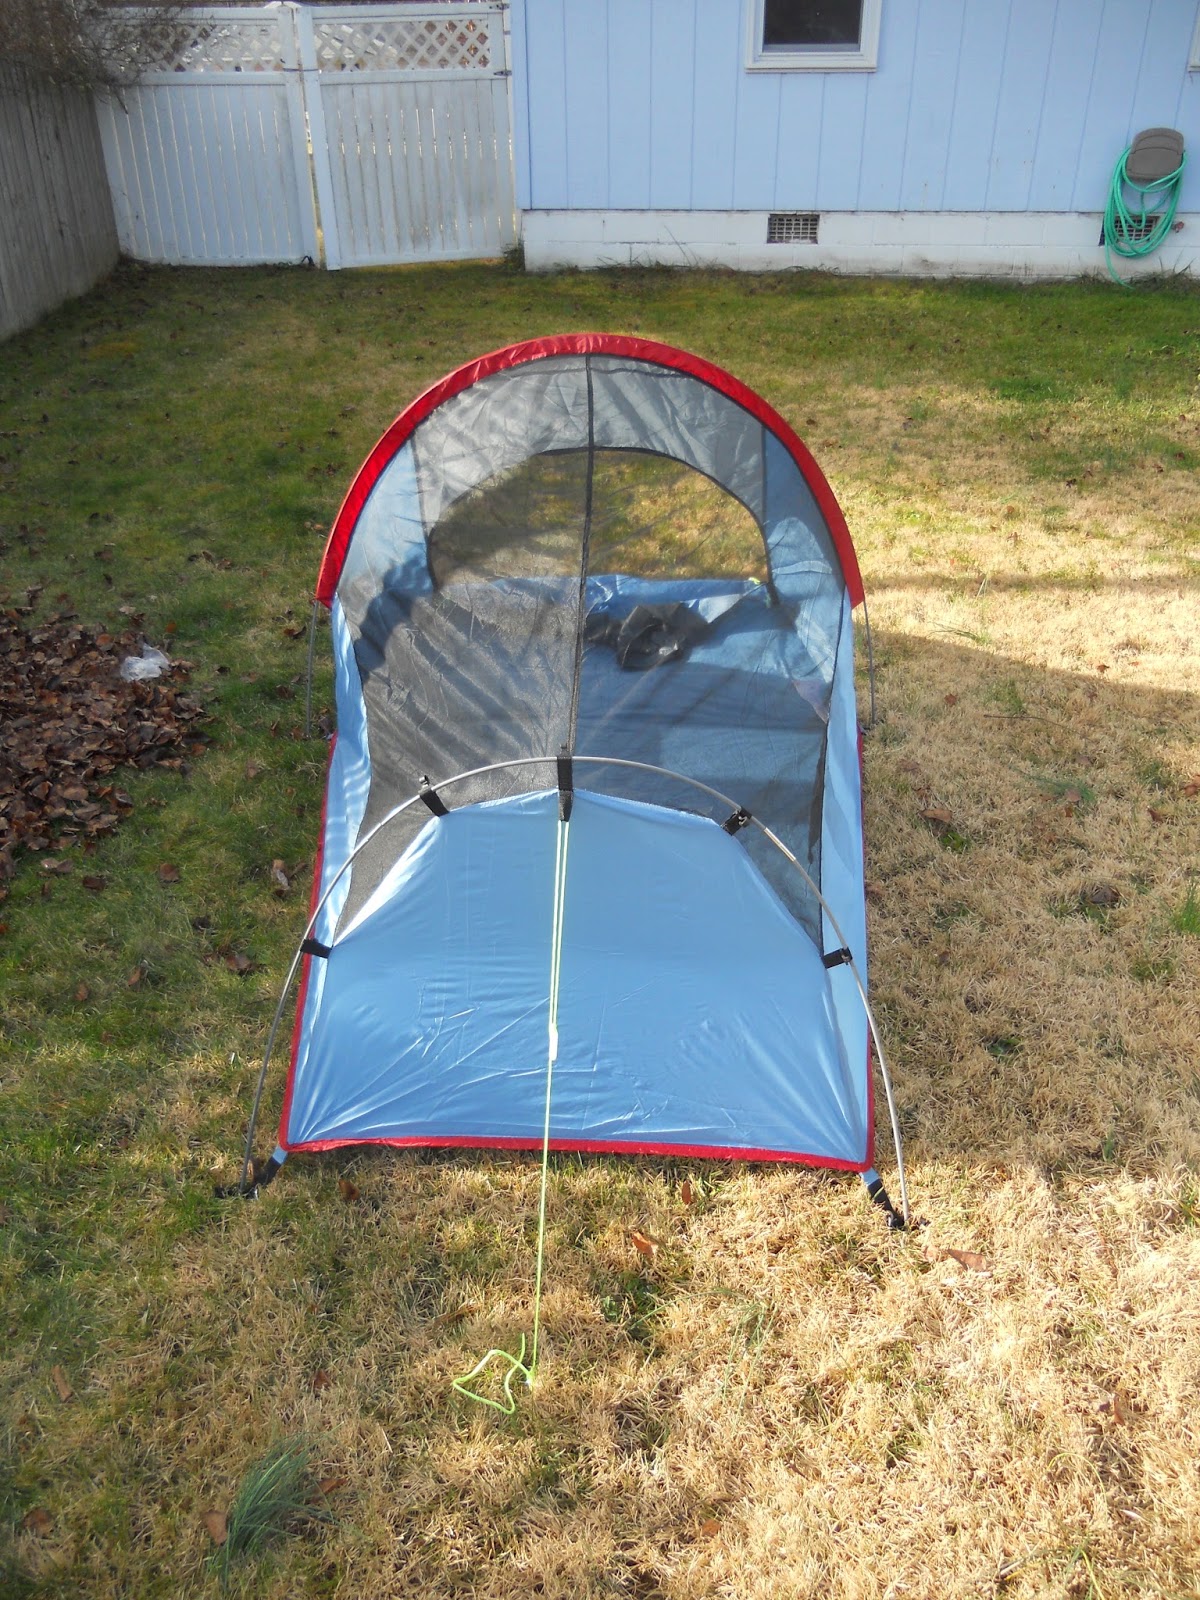 Texsport Saguaro Bivy Shelter Tent Assembled from Rear